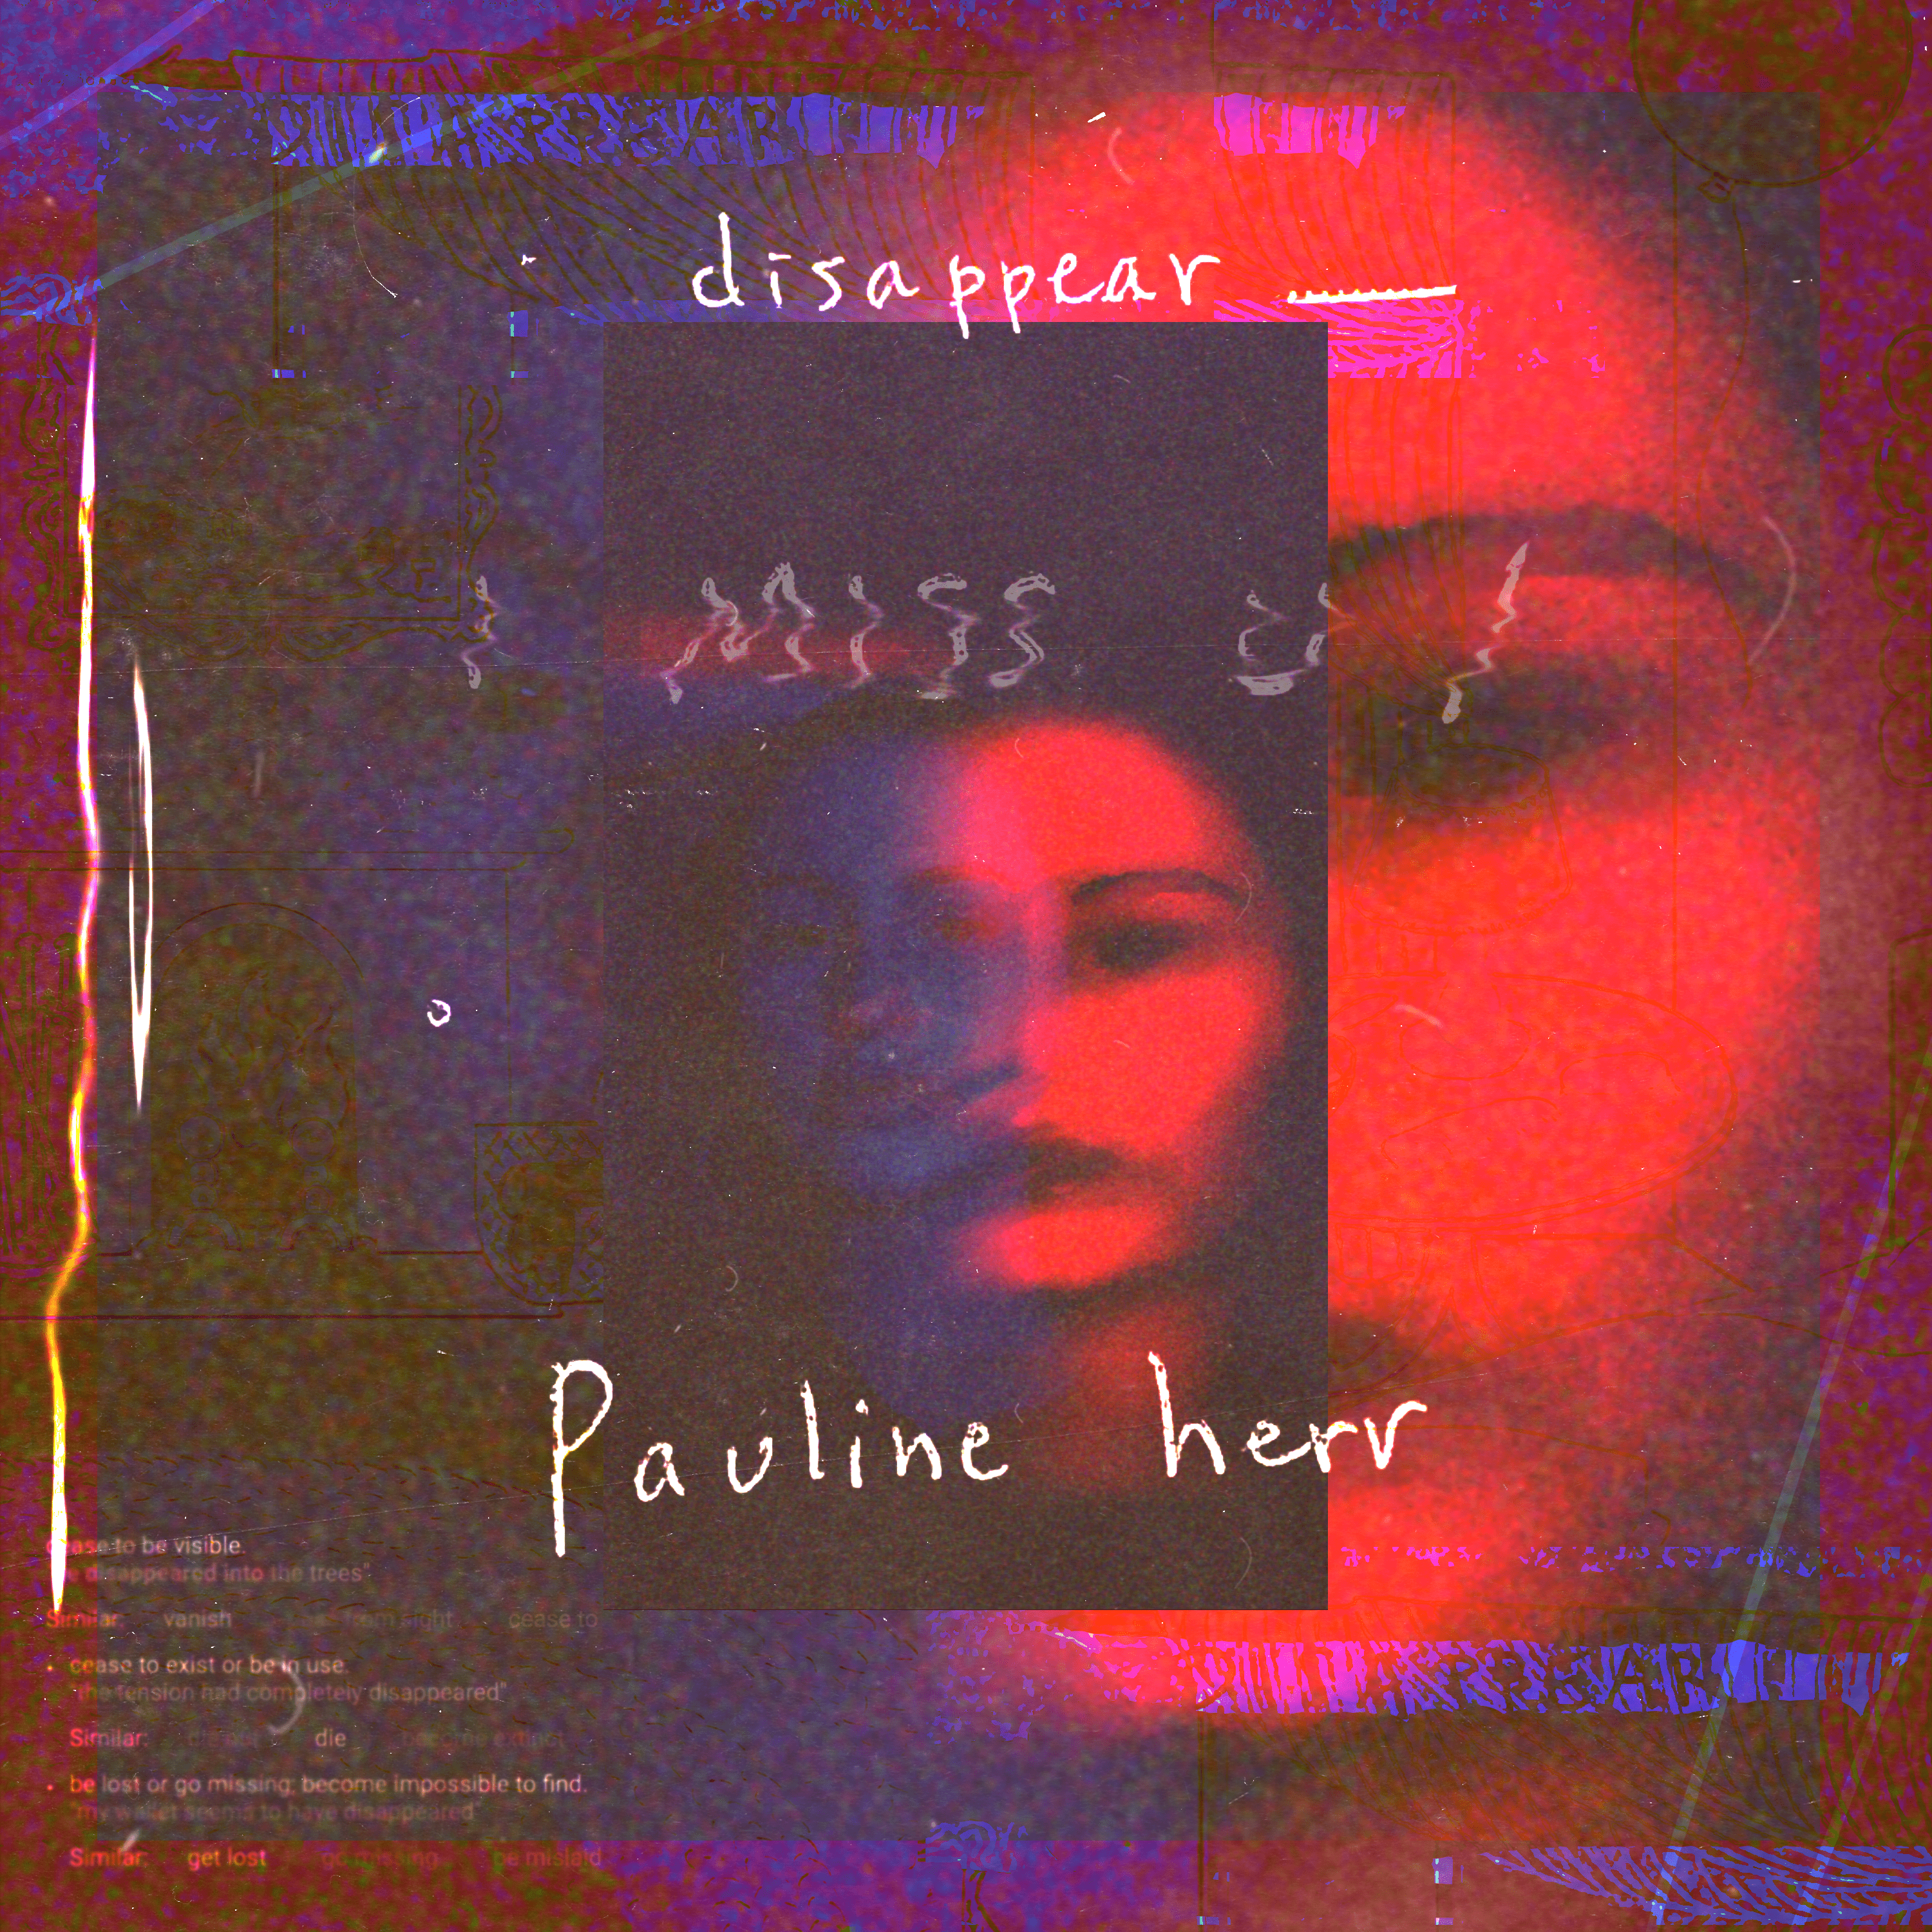 Cover art for Disappear by Pauline Herr ｡･:*:･ﾟ☆